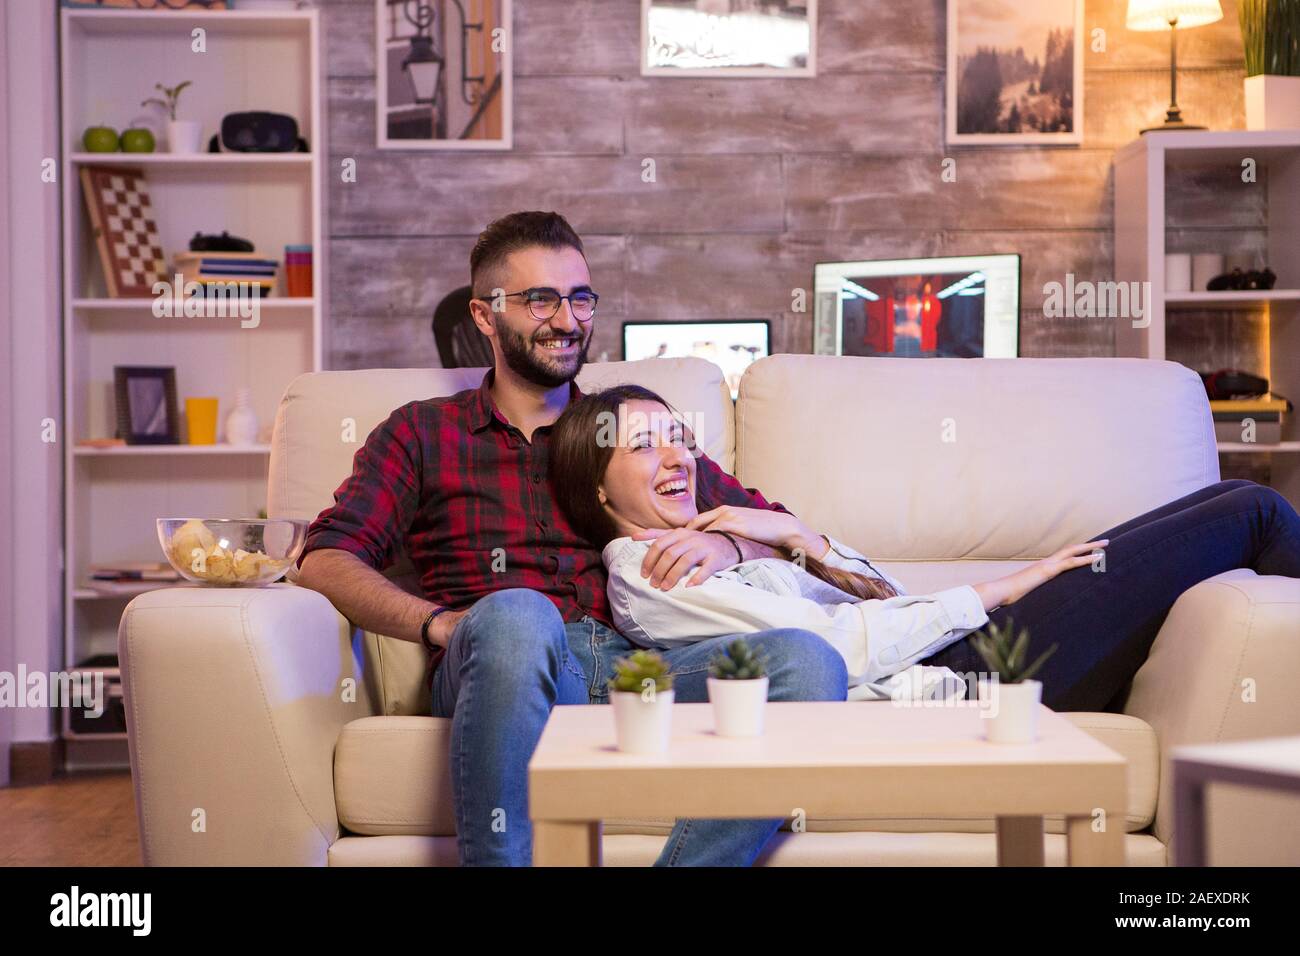 Cheerful young couple laughing while watching a tv show on tv at night. Couple sitting on sofa. Stock Photo